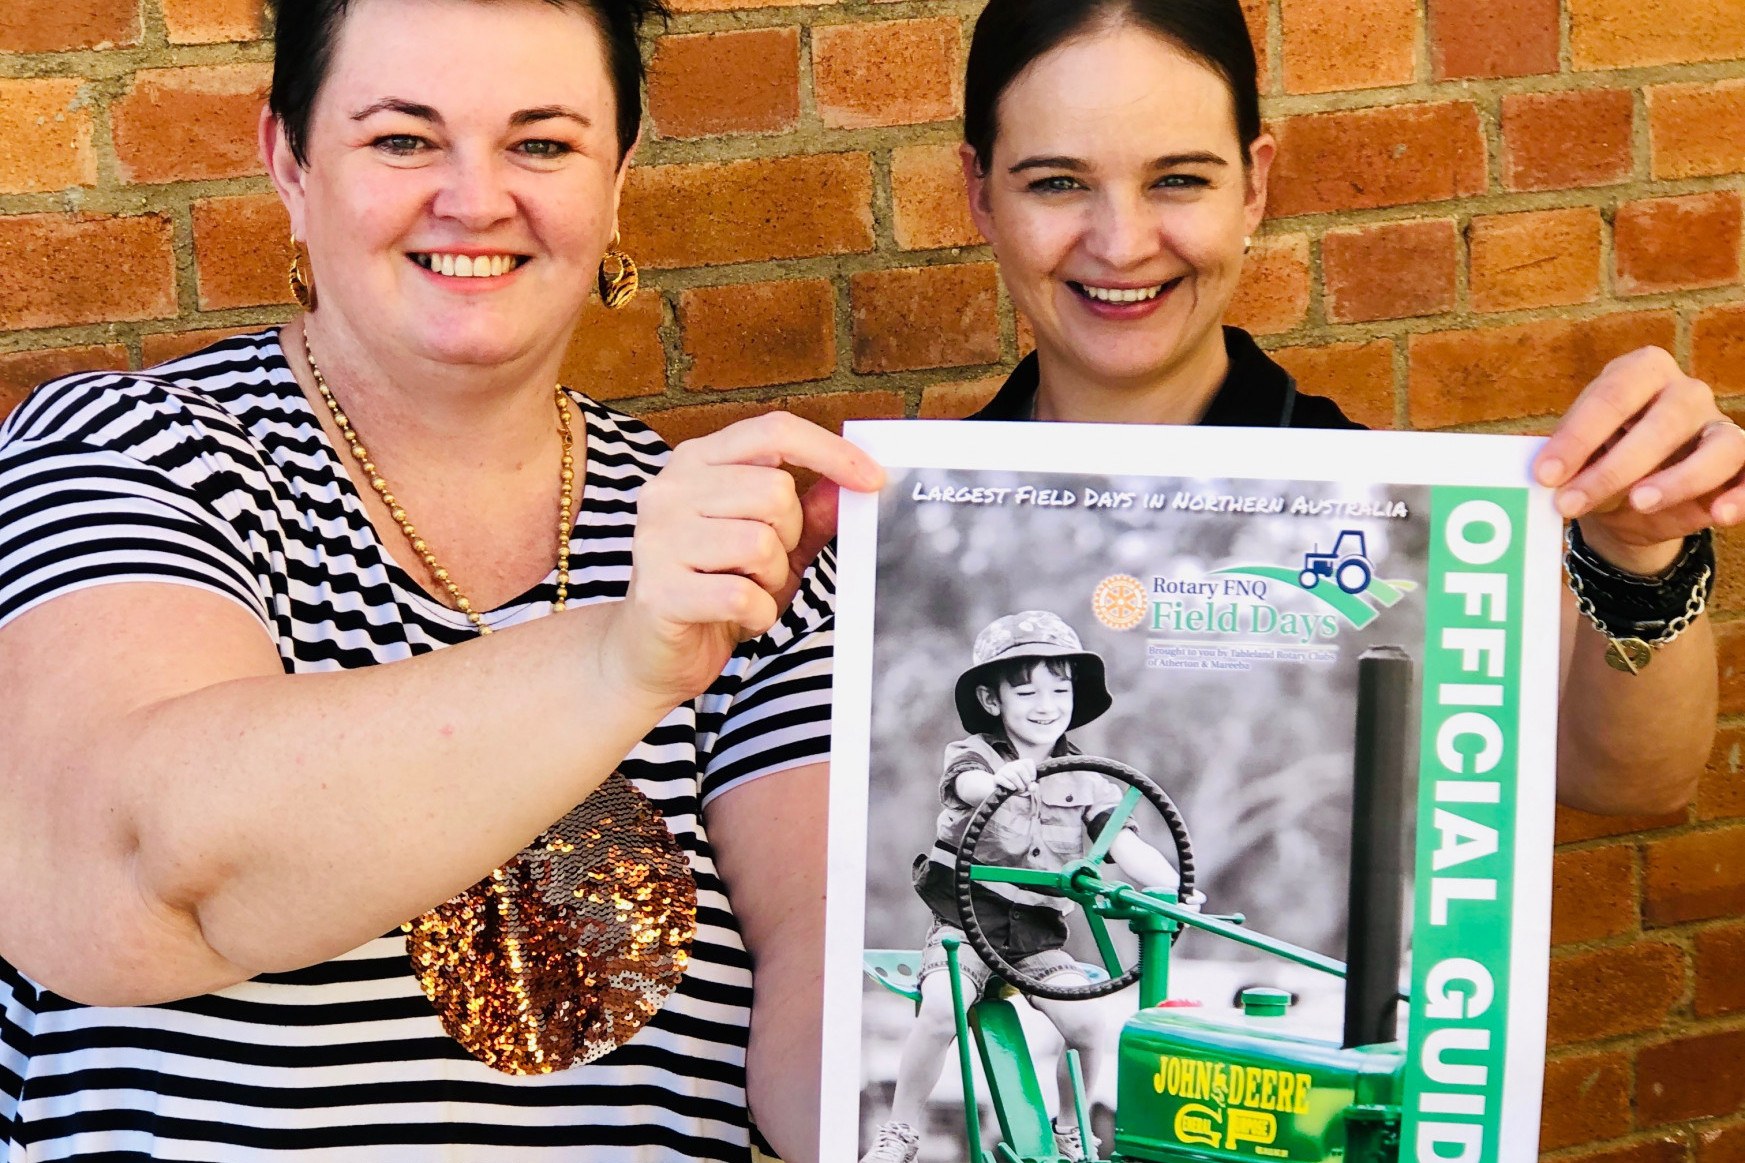 Rotary FNQ Field Days marketing coordinator Jeanette Sturiale and official guide coordinator Natasha Srhoj, with the winning photo that appeared on the cover of the 2019 offical guide.